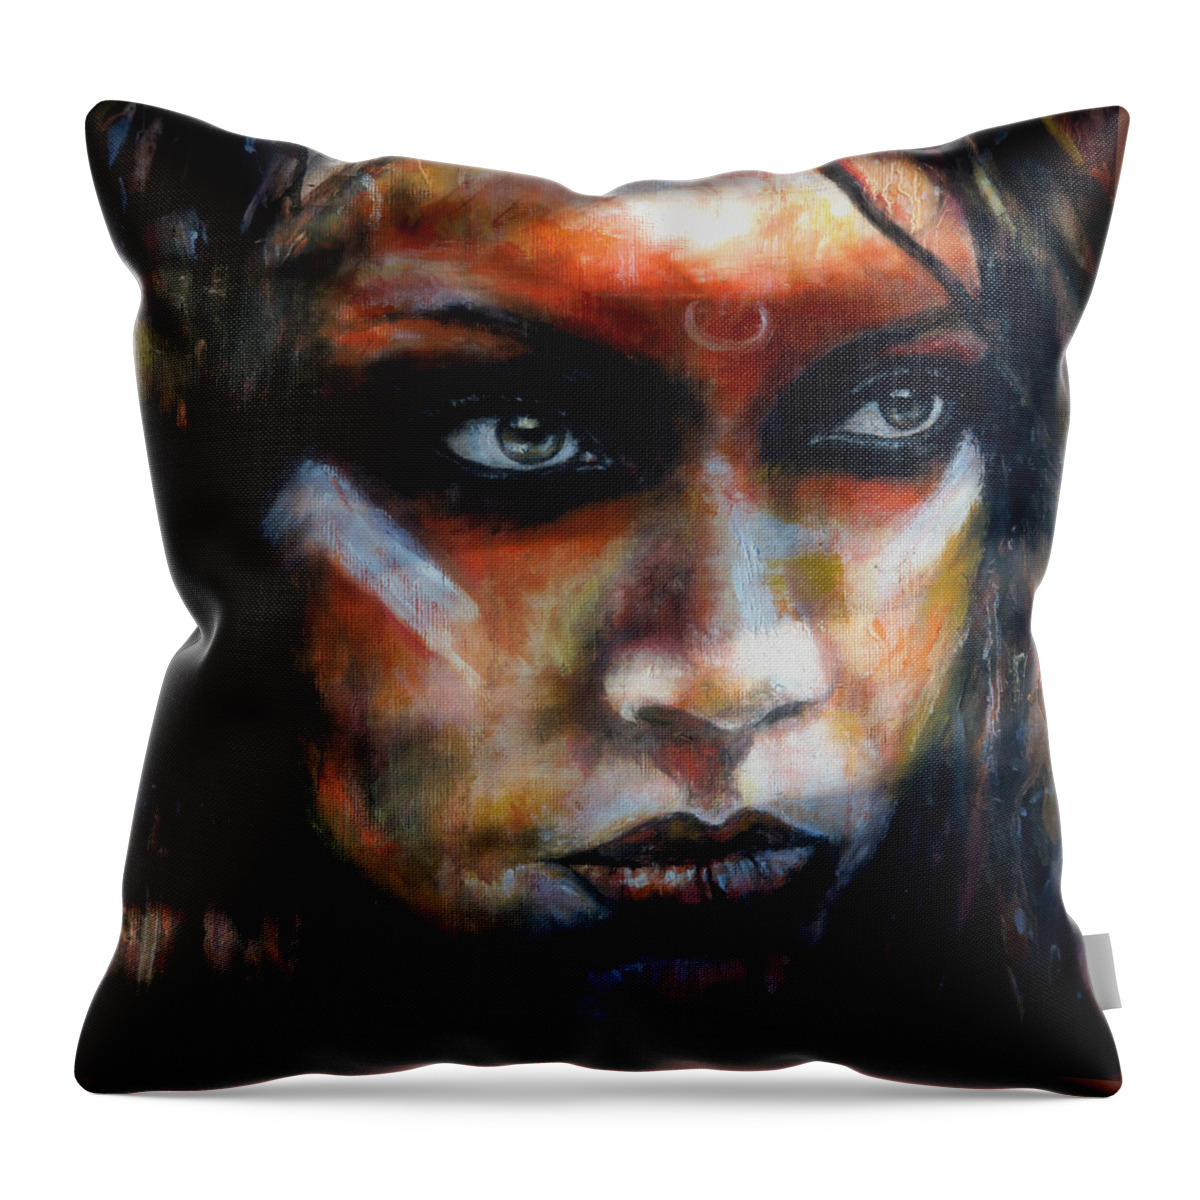 Zoe Oakley Throw Pillow featuring the painting Ancestress by Zoe Oakley